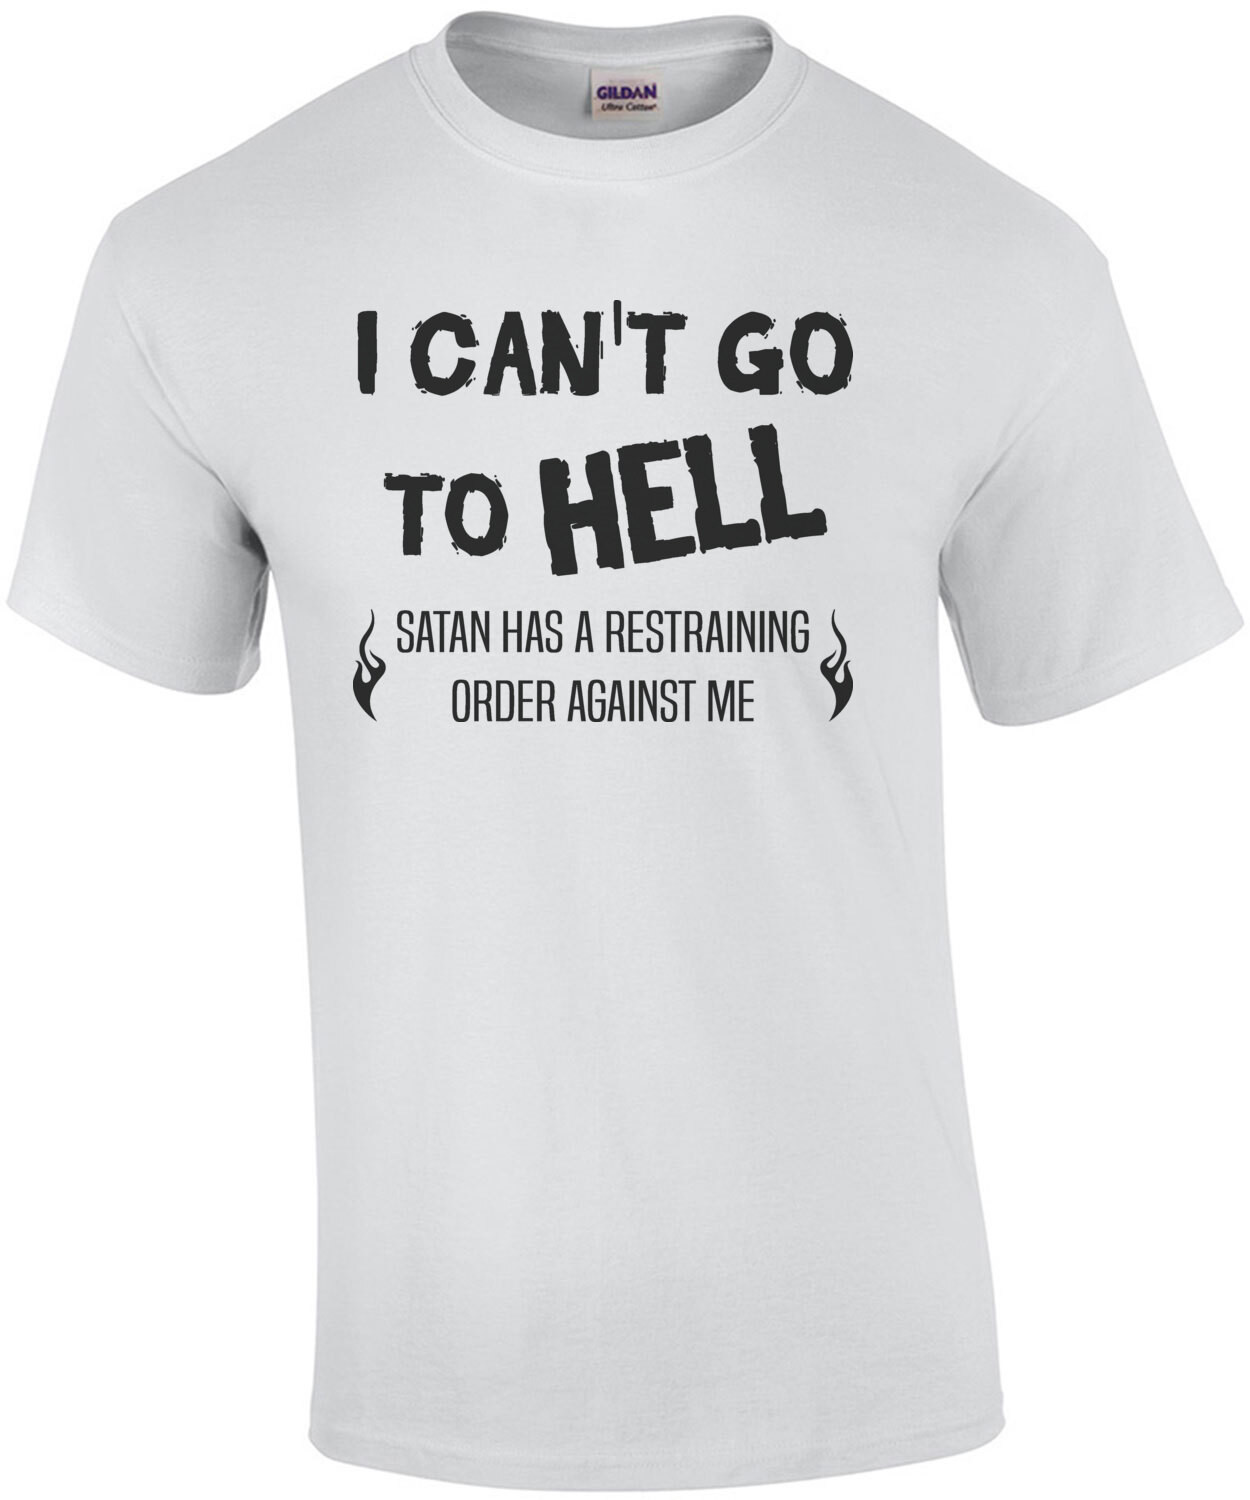 I can't go to Hell - Satan has a restraining order against me - funny t-shirt